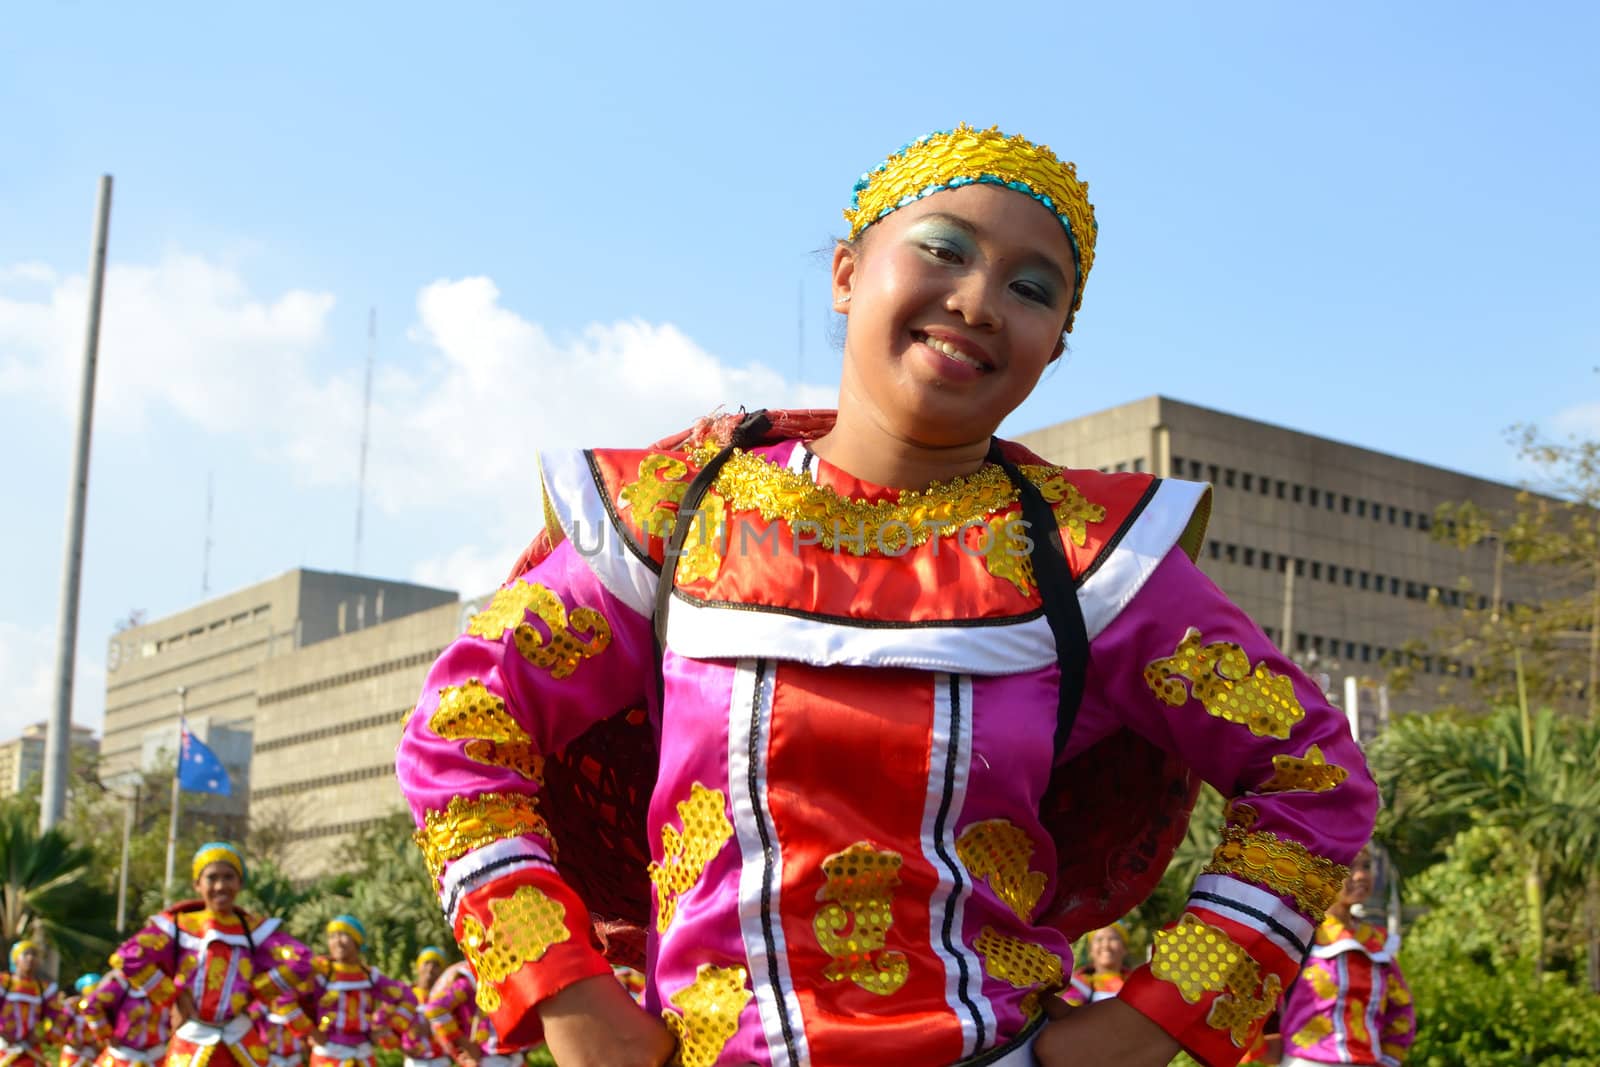 MANILA, PHILIPPINES - APR. 14: Street dancer enjoying parade during Aliwan Fiesta, which is the biggest annual national festival competition on April 14, 2012 in Manila Philippines.